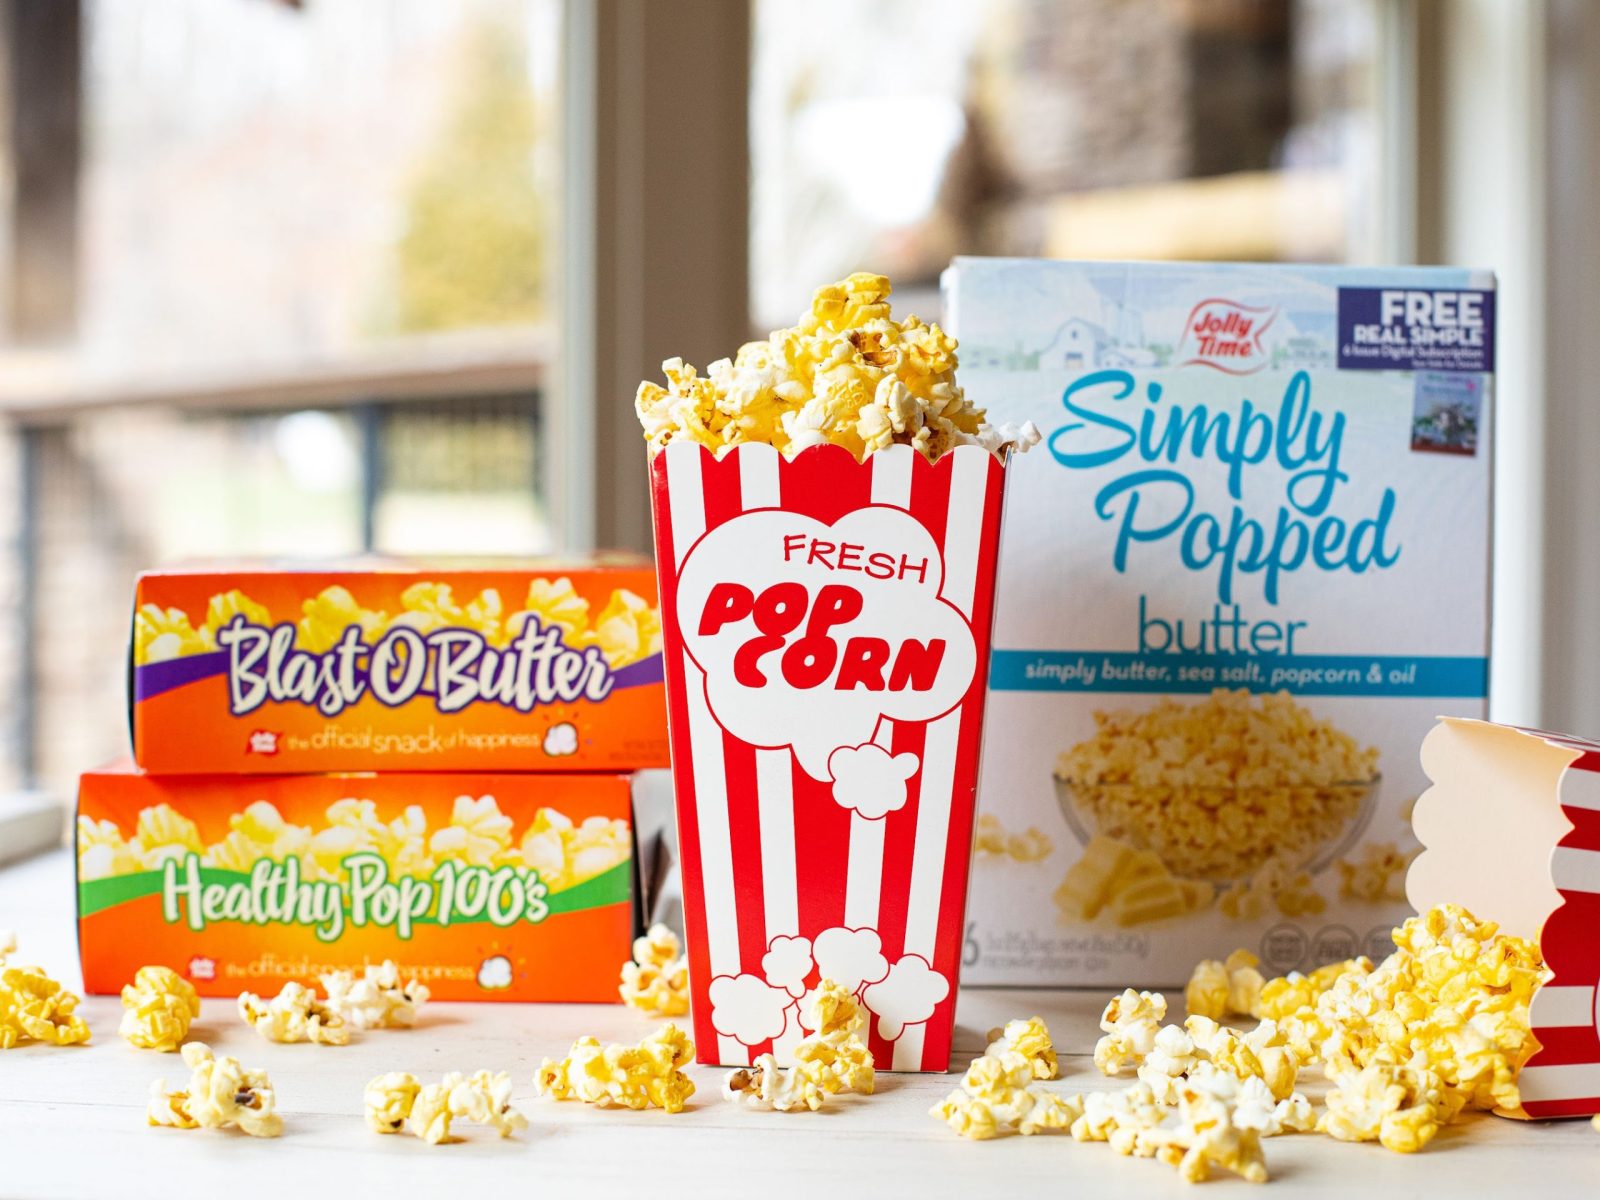 Jolly Time Pop Corn Giveaway Winners Announced – See If You Won A $50 Publix Gift Card